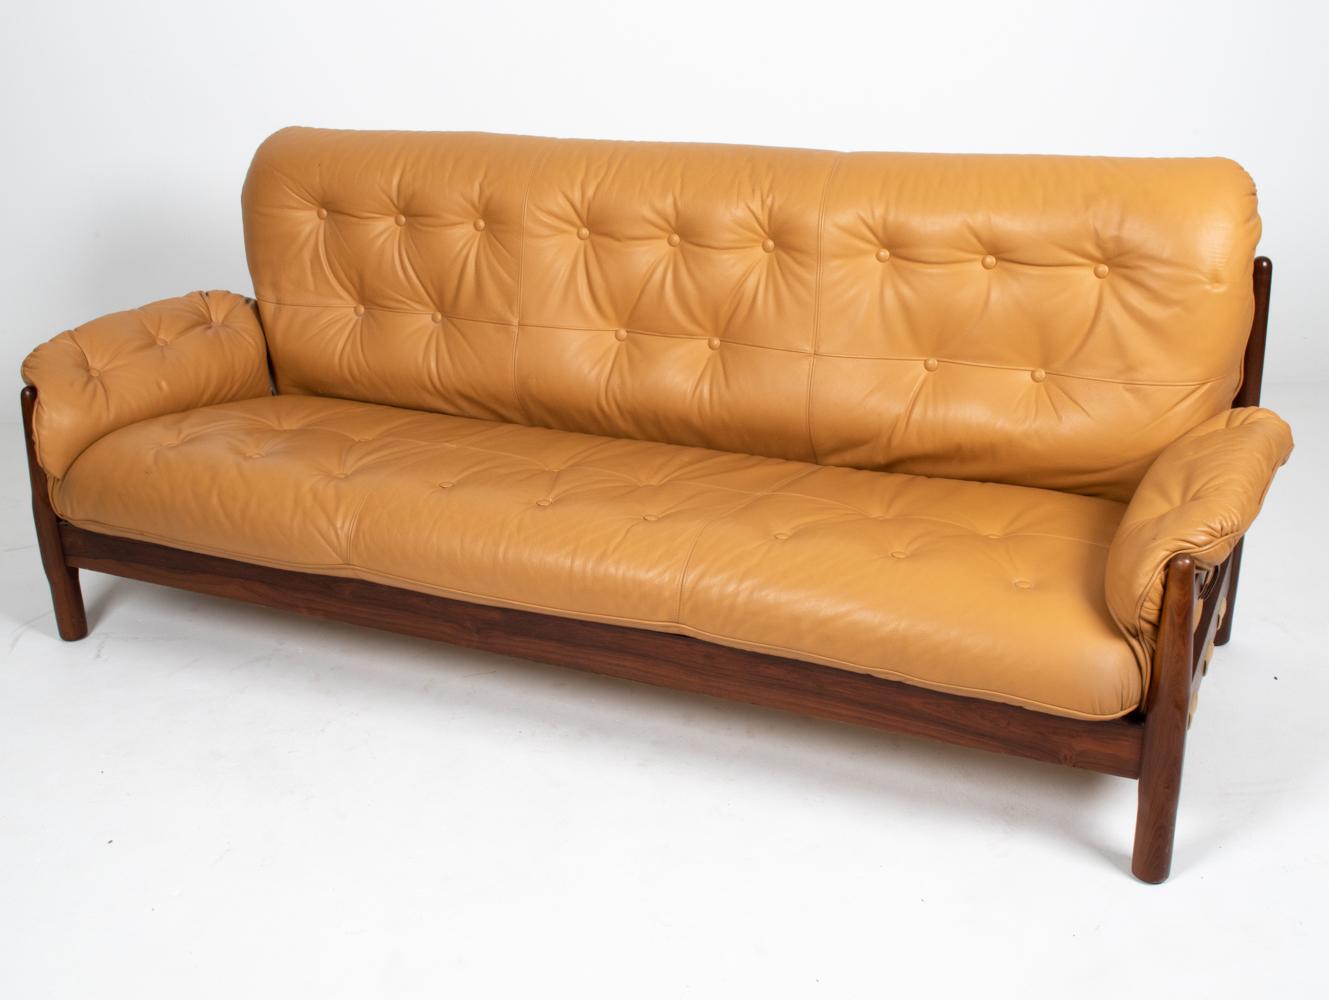 Generous proportions and luxurious finishes set this fabulous Brazilian Modernist sofa apart from the rest. The frame is crafted from gorgeous solid rosewood, with interesting sculptural chamfering at the legs. The tufted cushions are finished in